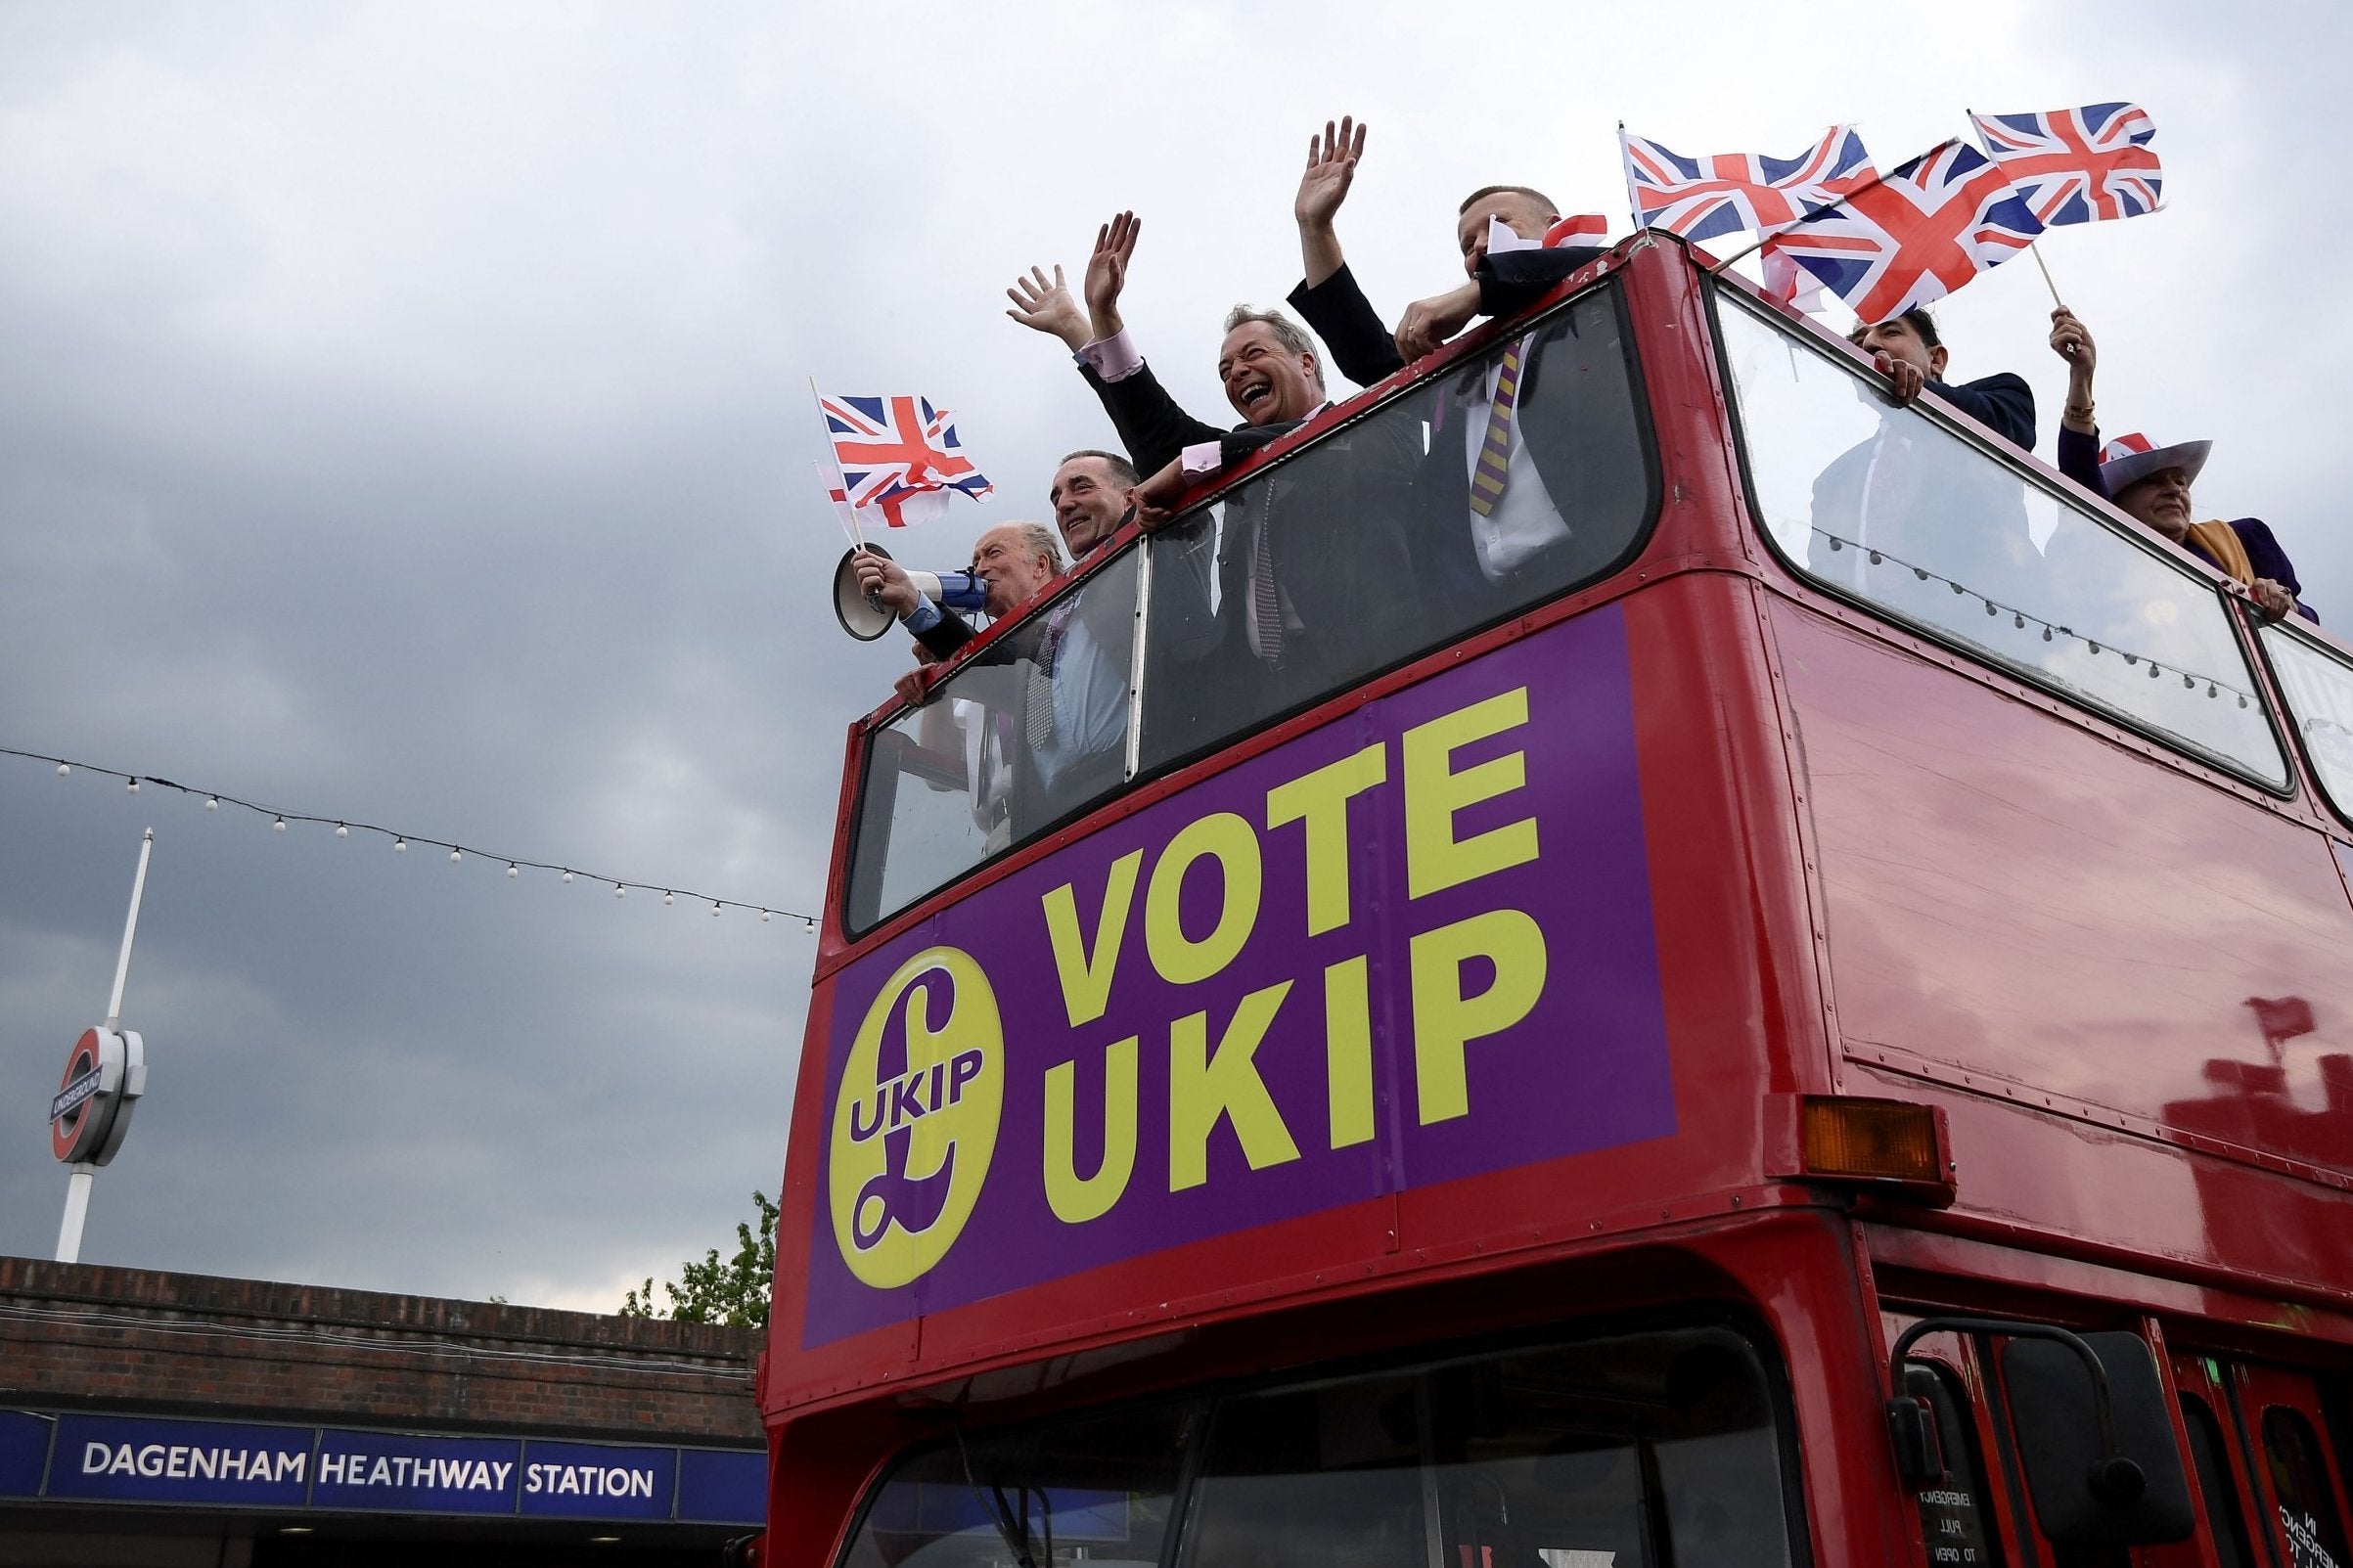 The passengers on the Ukip bus are changing